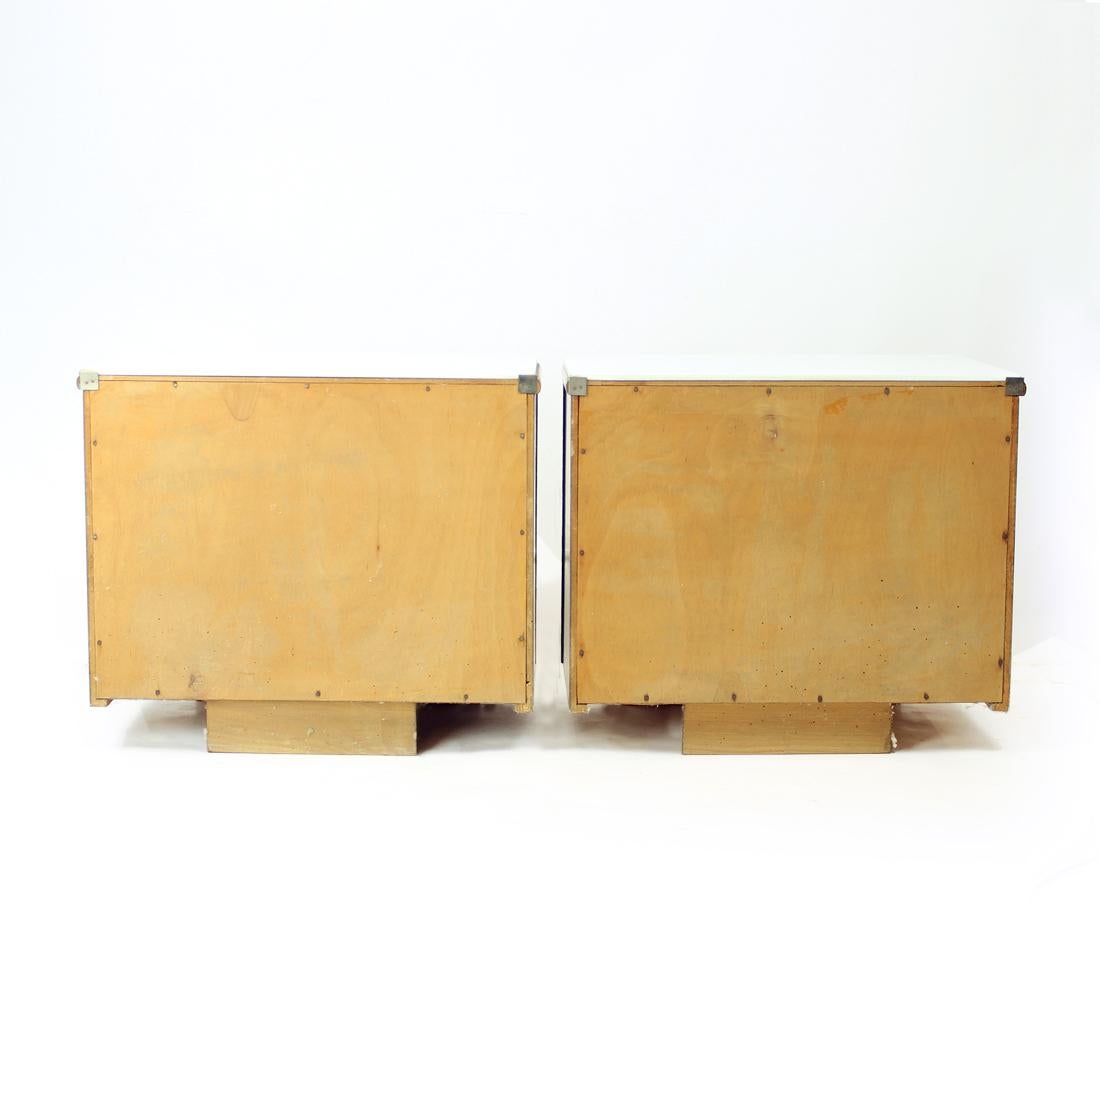 1960s Bedside Tables In Walnut And White Glass, Czechoslovakia For Sale 8